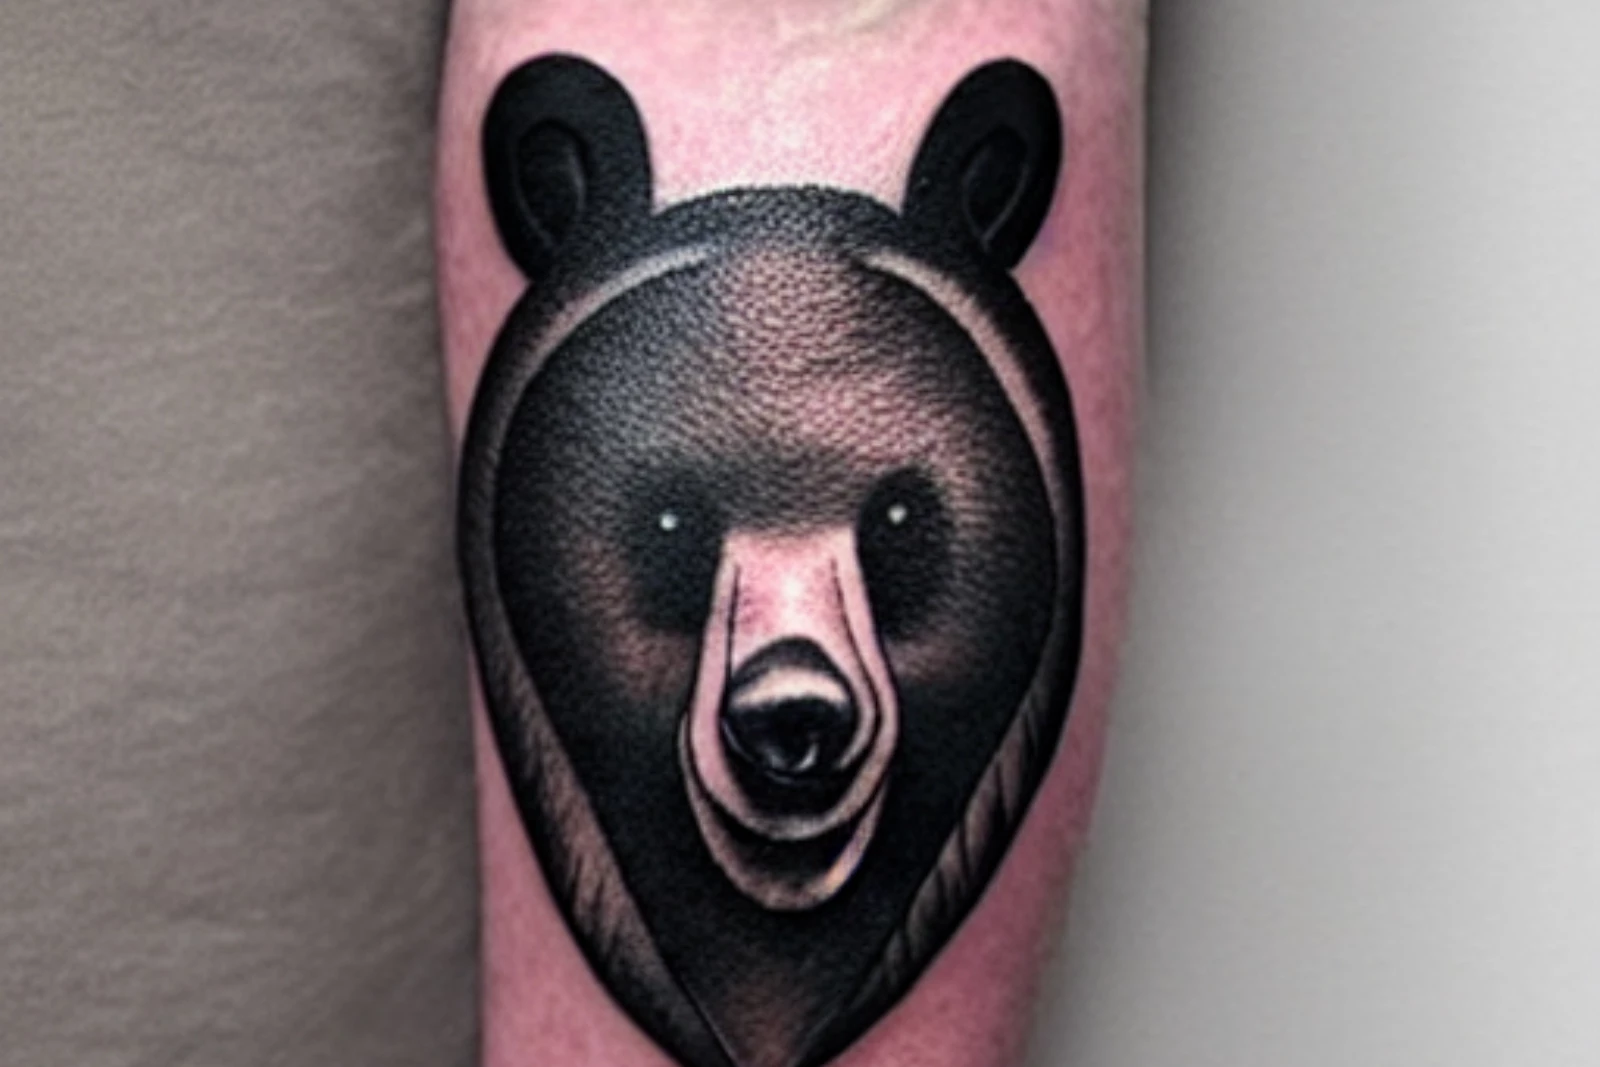 What are you thoughts on bear's new arm tattoo? : r/Blackbear